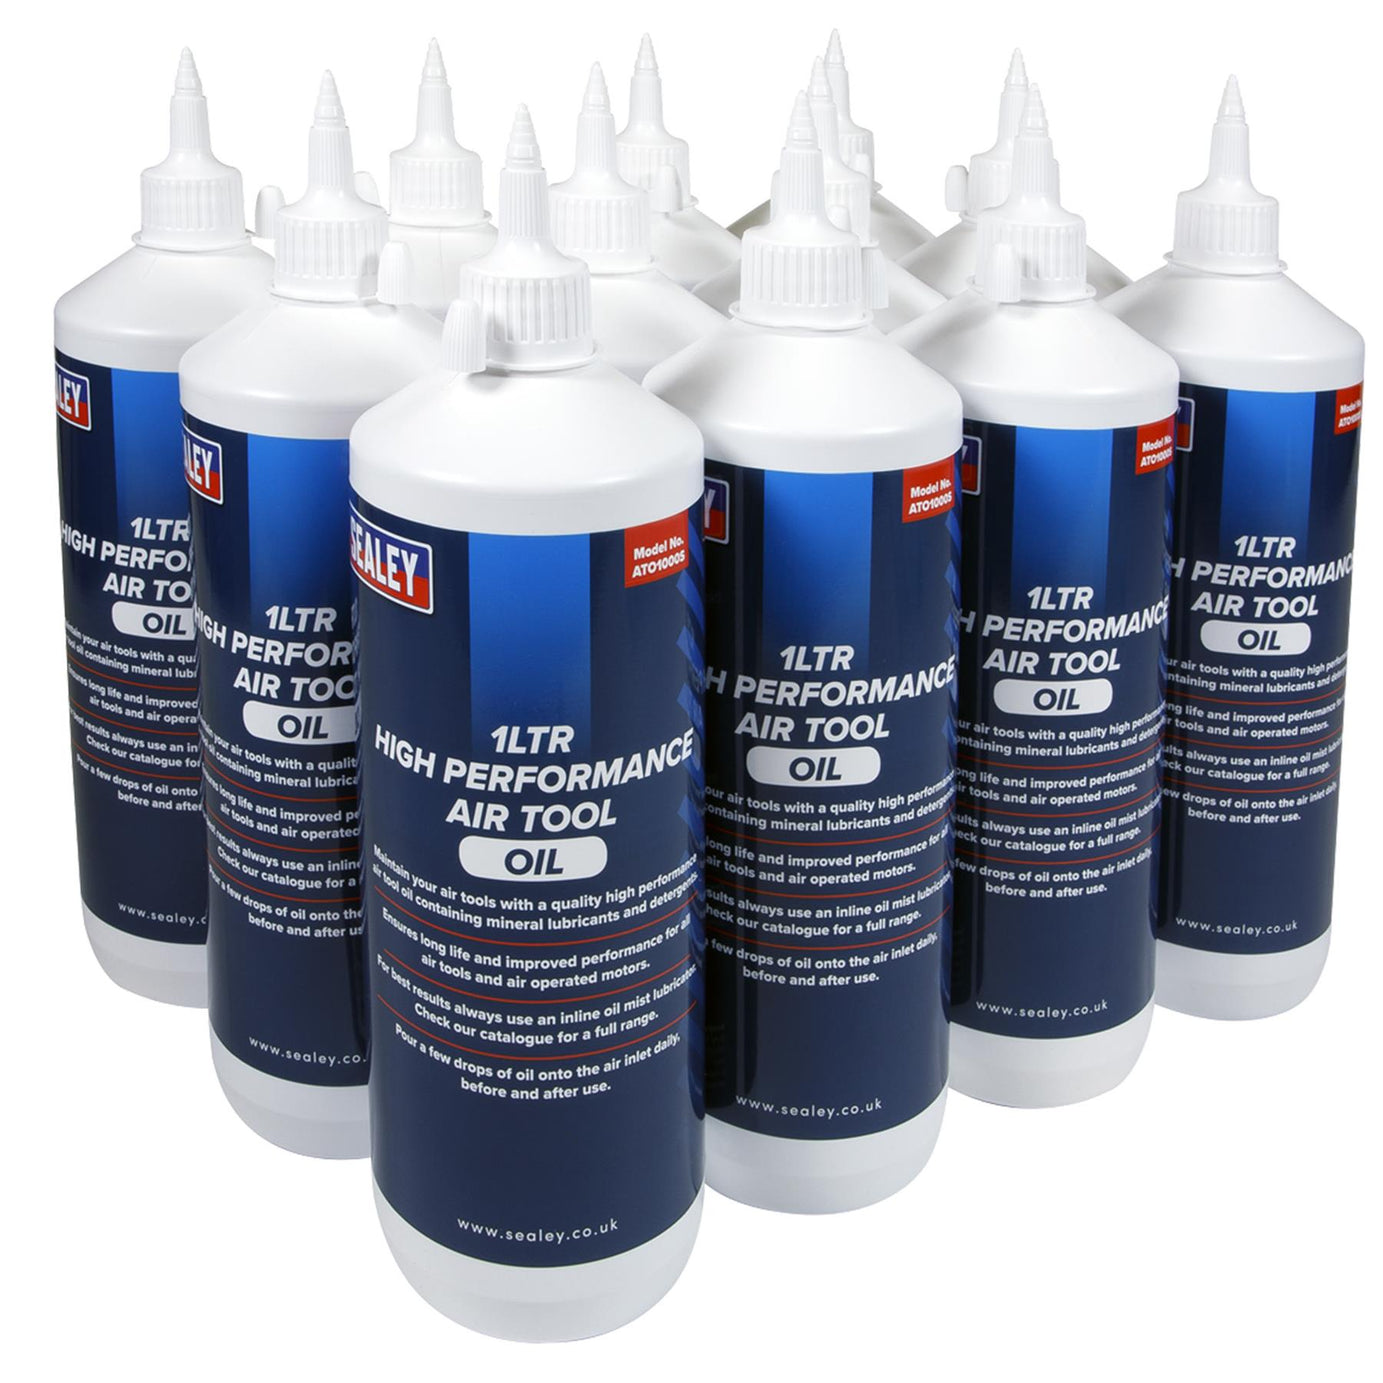 Sealey Air Tool Oil 1L Pack of 12  Quality High Performance air tool oil